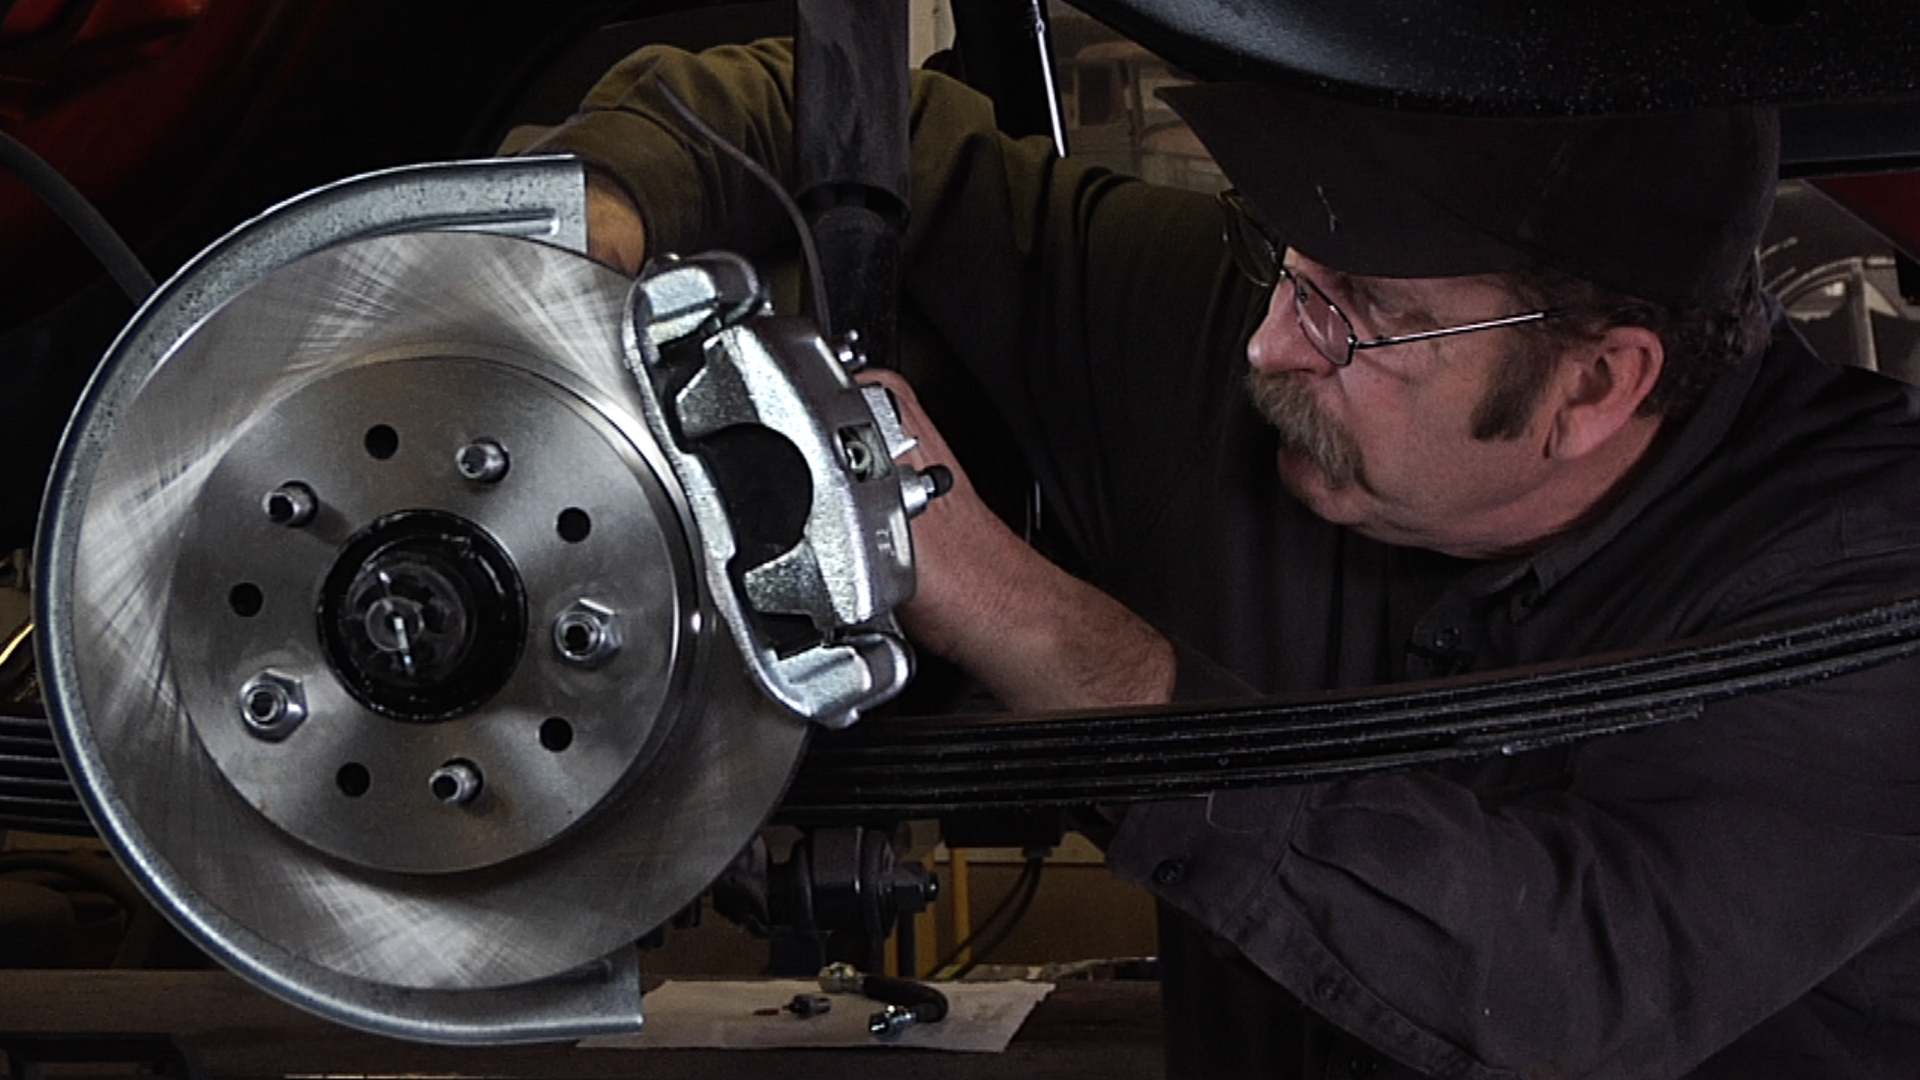 Replacing Rear Disc Brakes product featured image thumbnail.